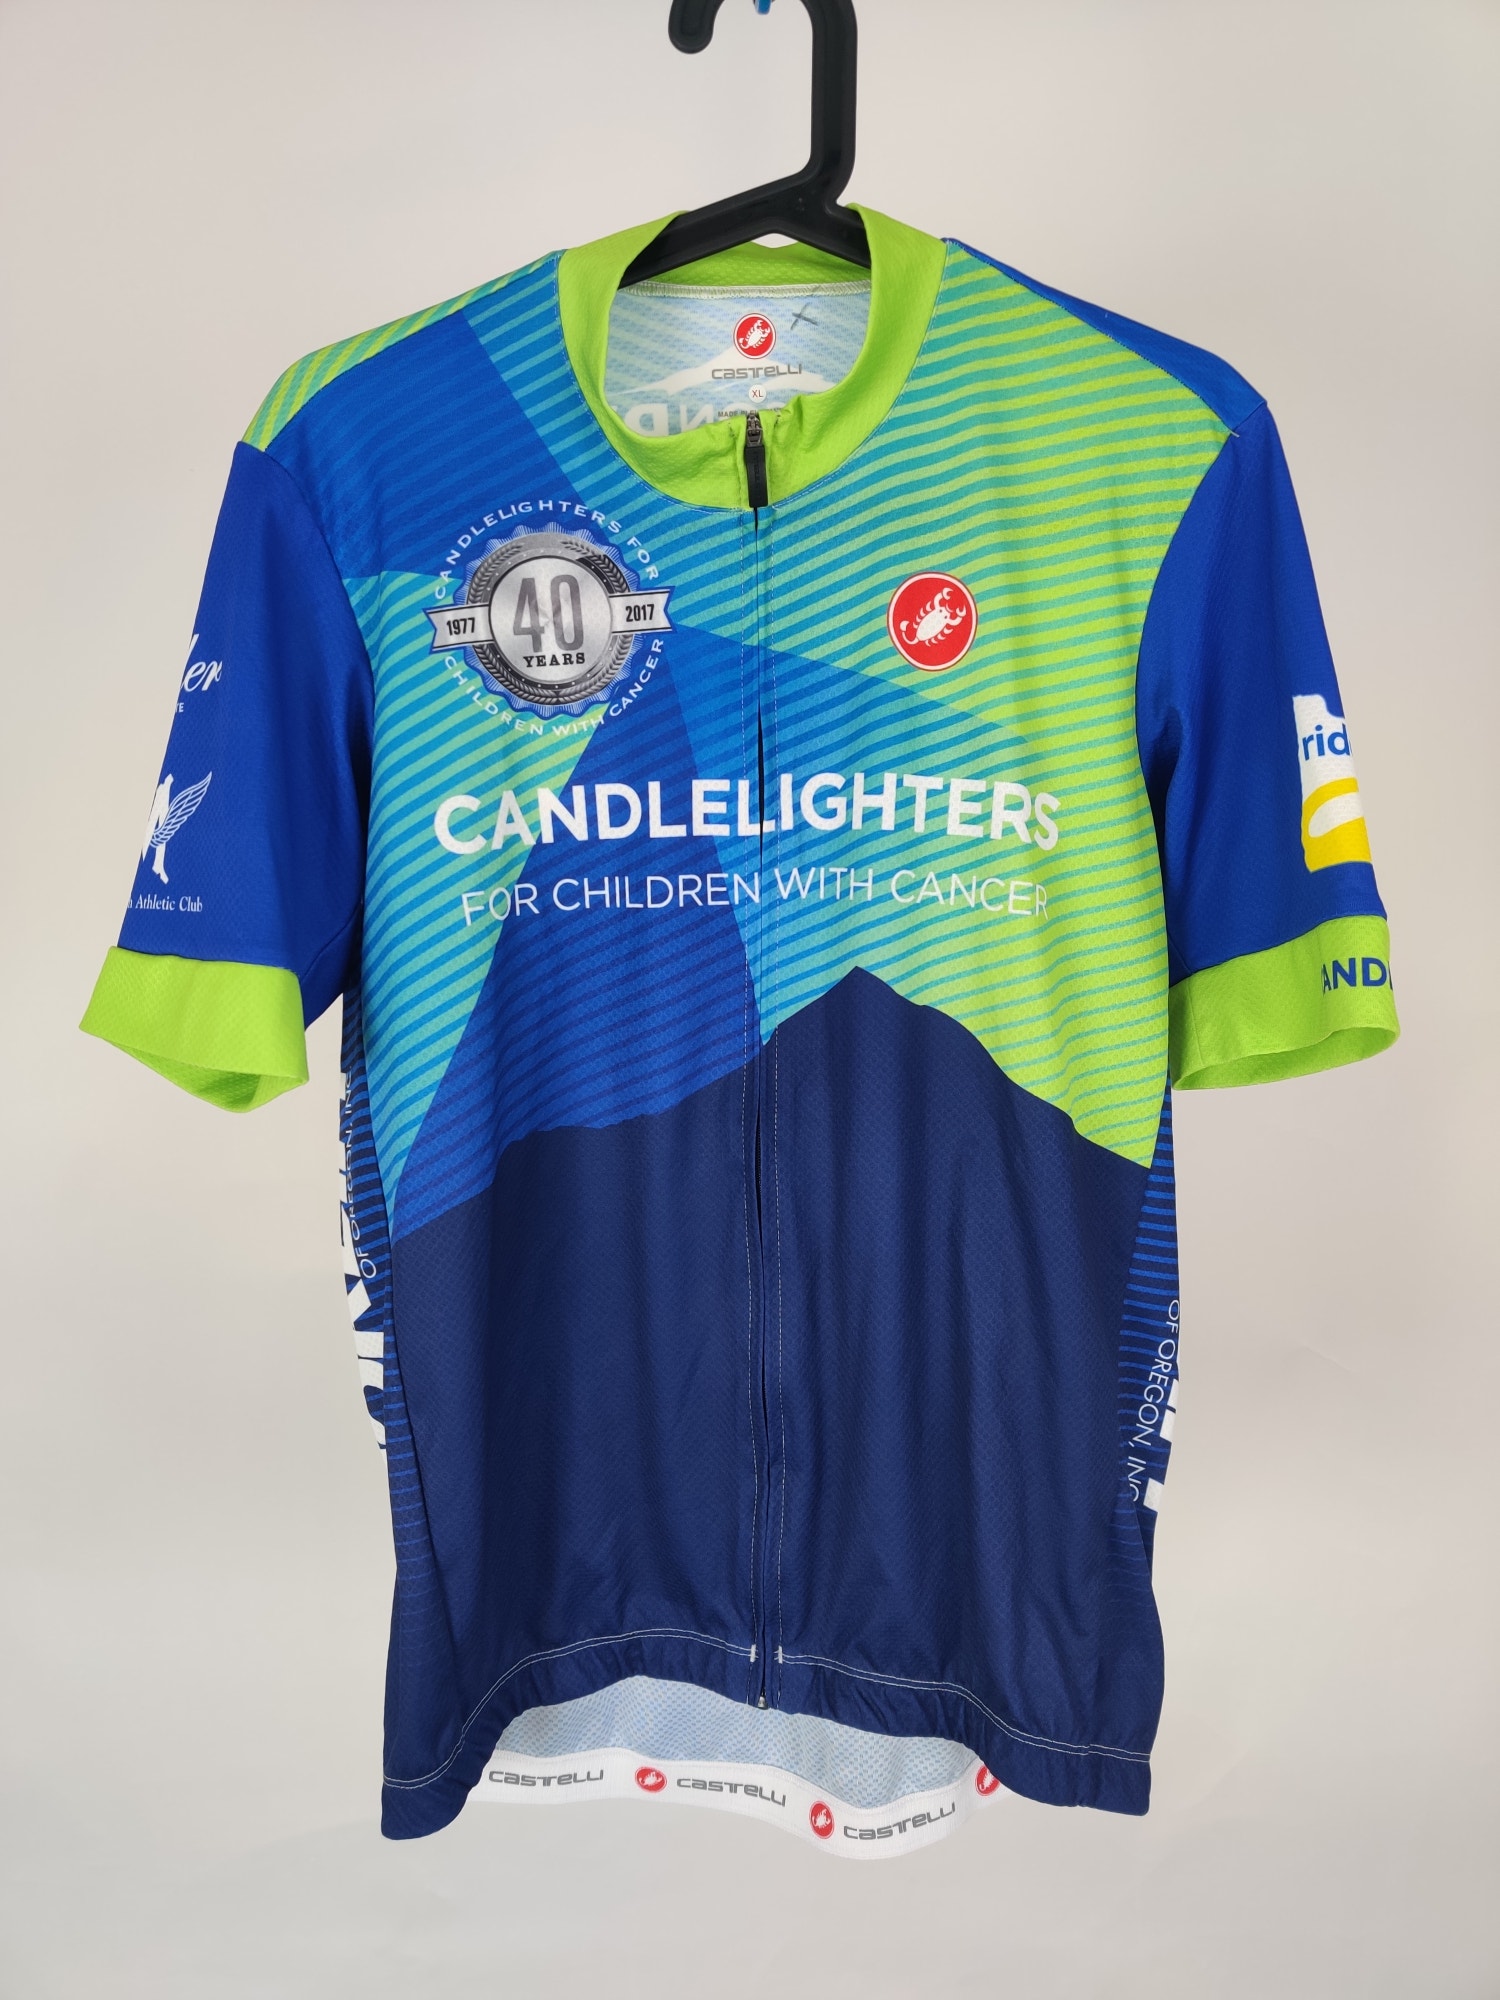 (V) Castelli Candlelighters Men cycling jersey lightweight multicolor sz XL  - Picture 8 of 11